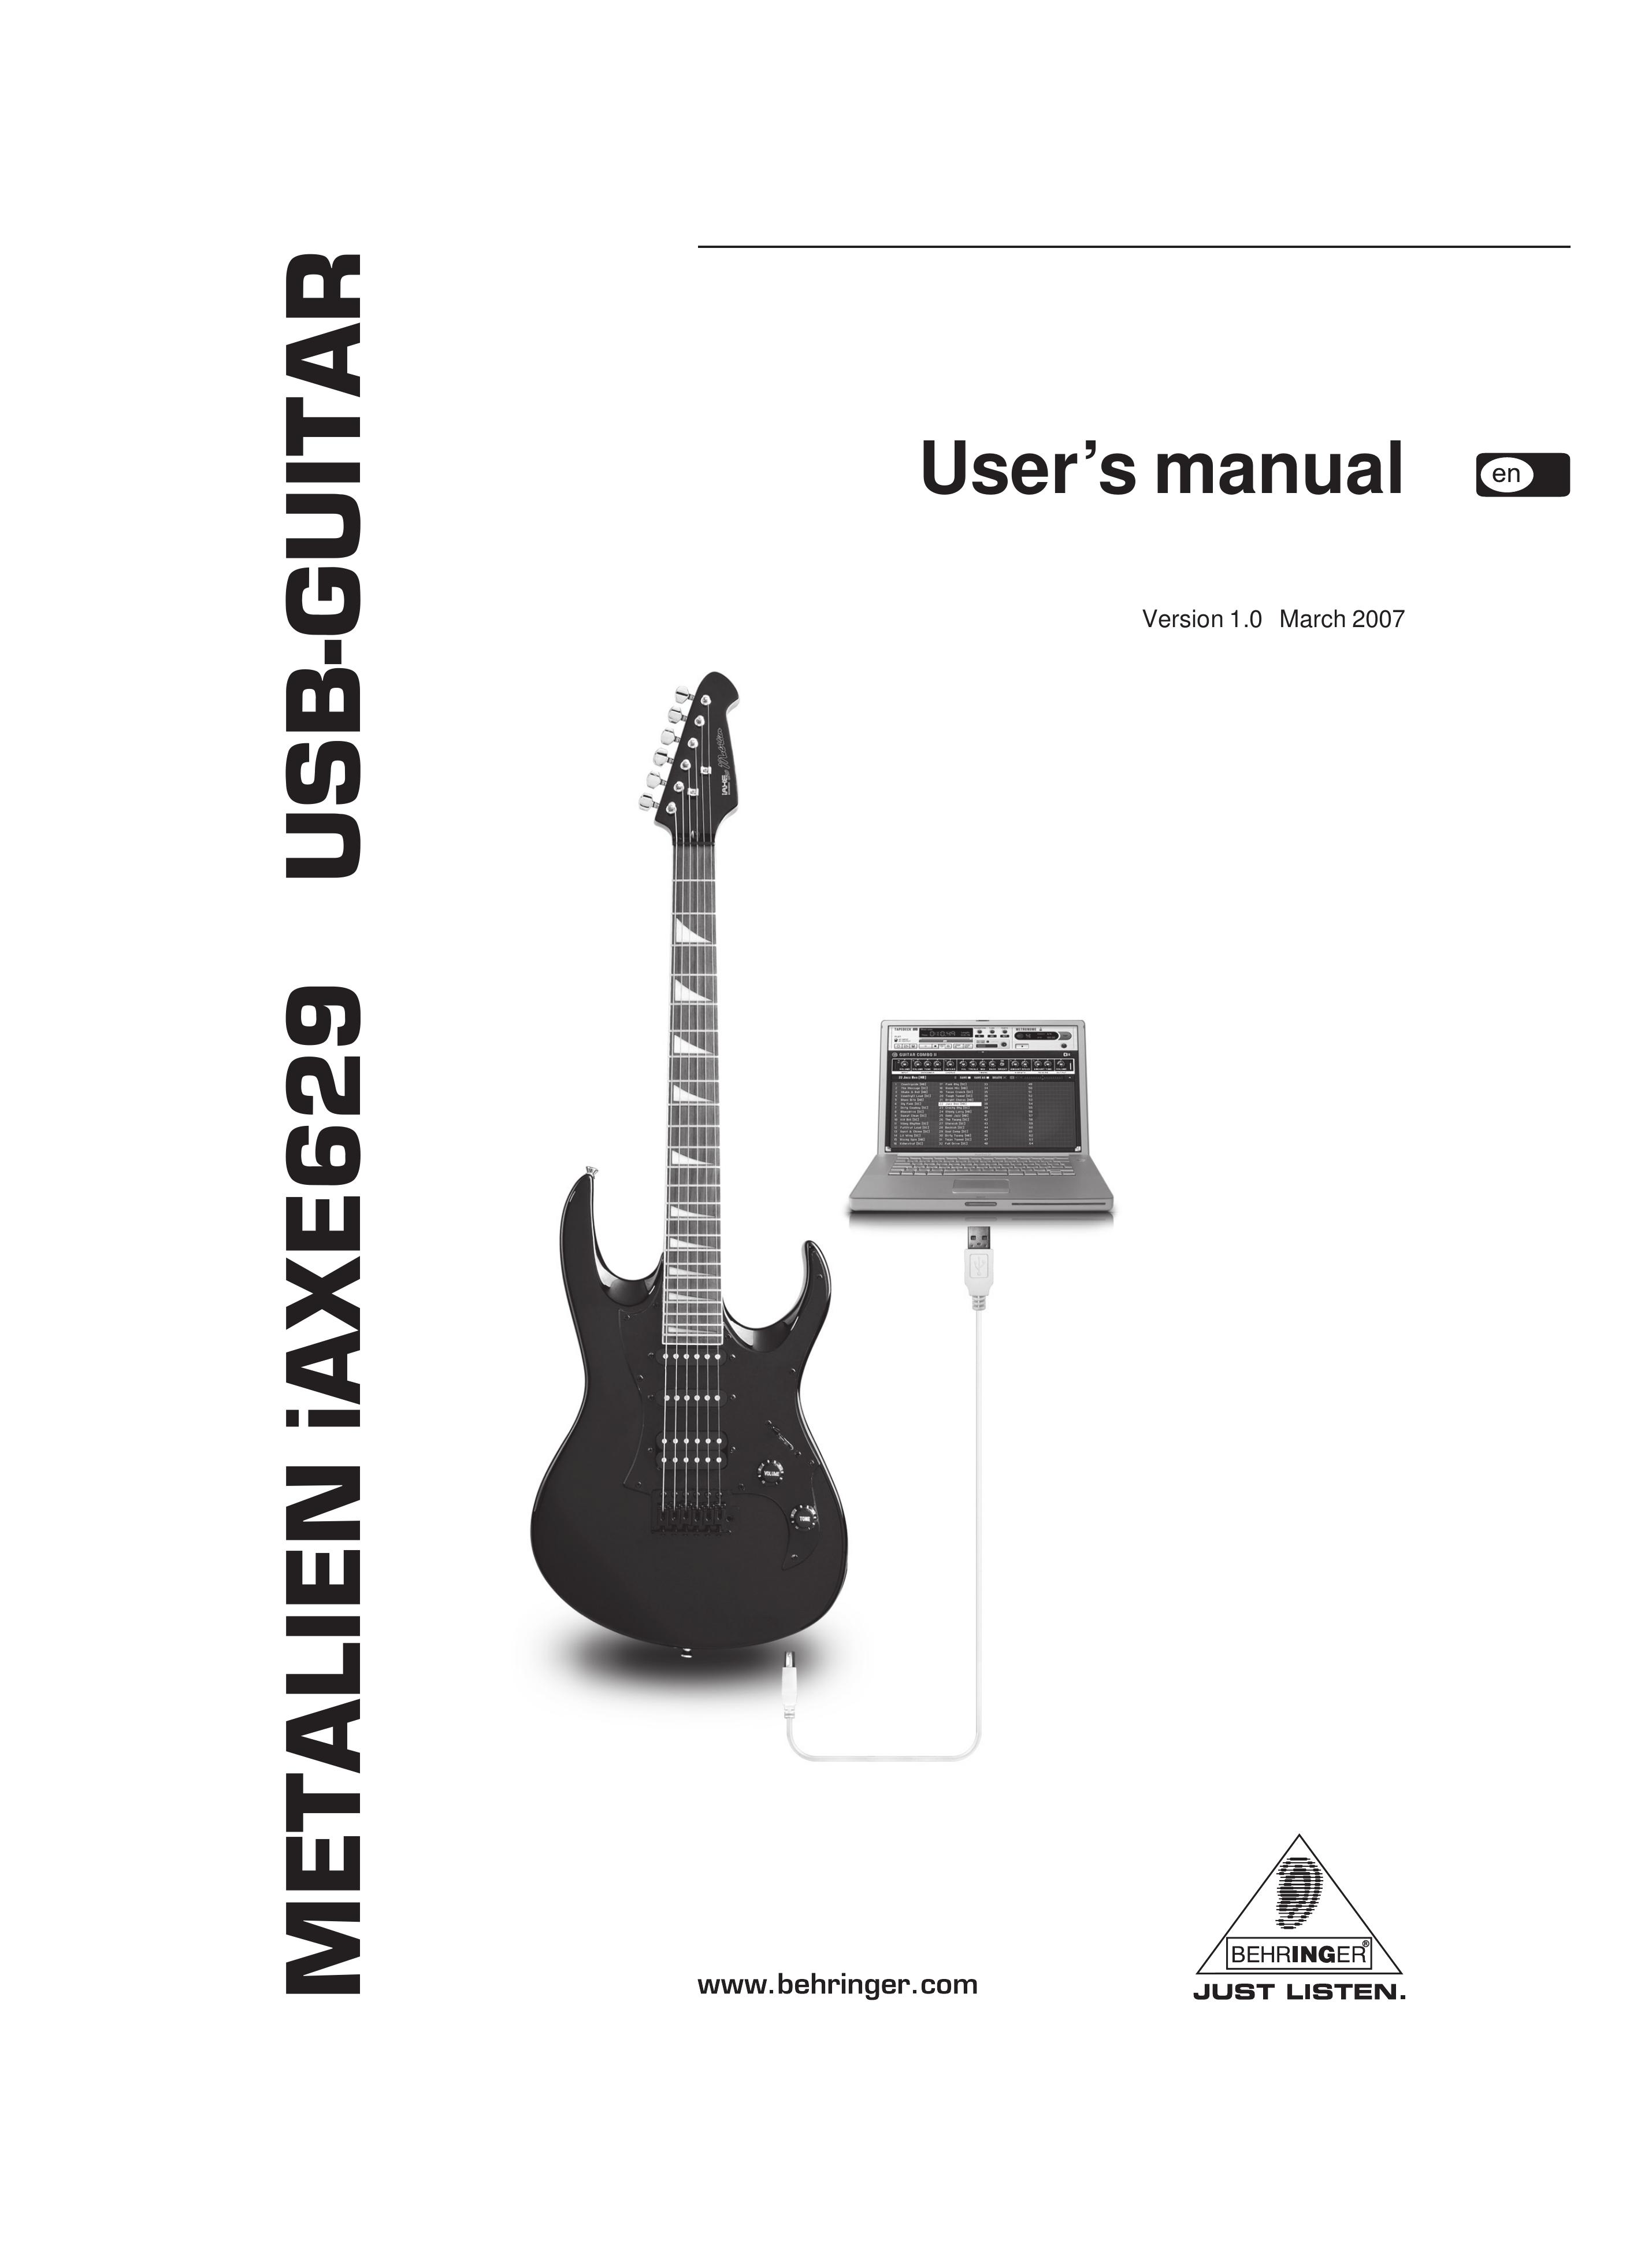 Behringer IAXE629 Guitar User Manual (Page 1)